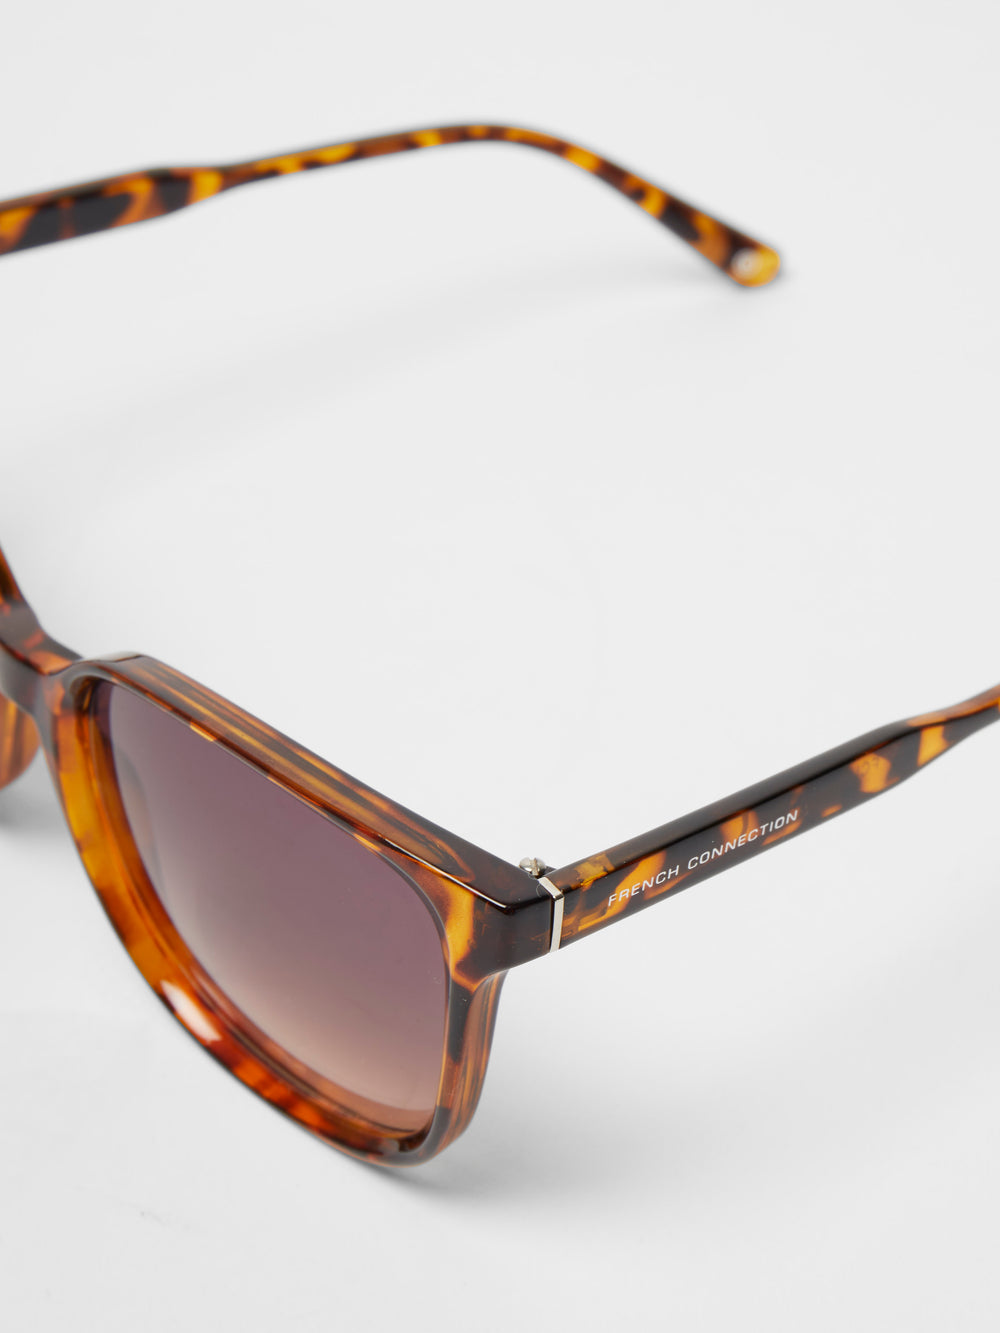 Modern Cat Eye Sunglasses Classic Tort | French Connection UK